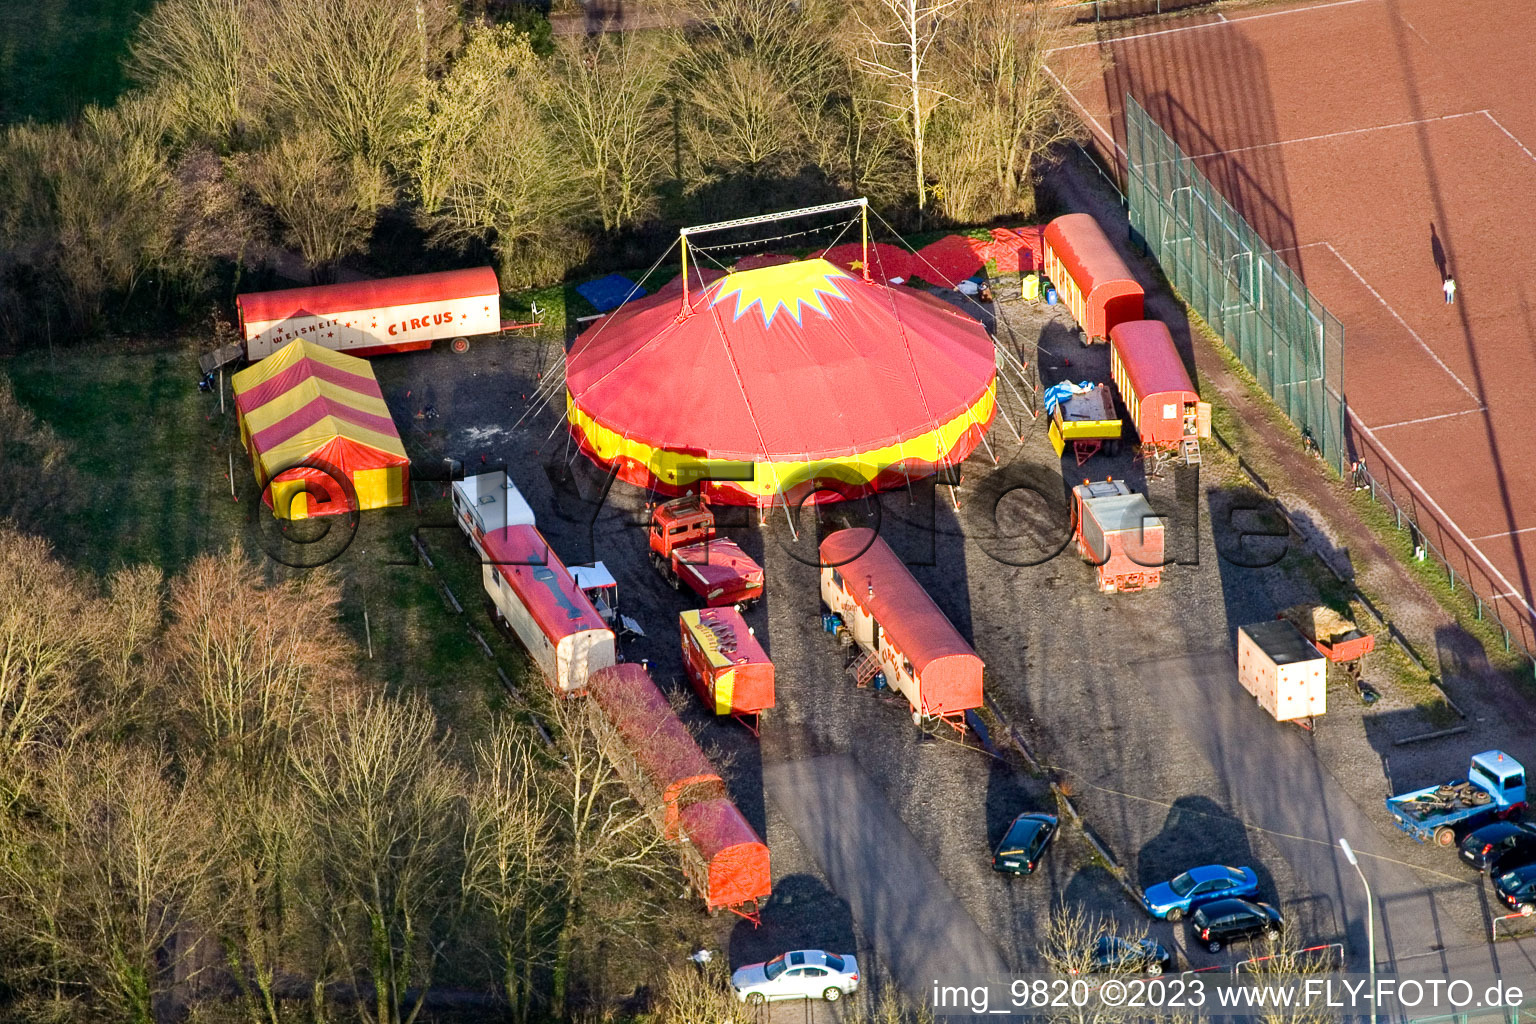 Circus wisdom at the sports field in Kandel in the state Rhineland-Palatinate, Germany from above